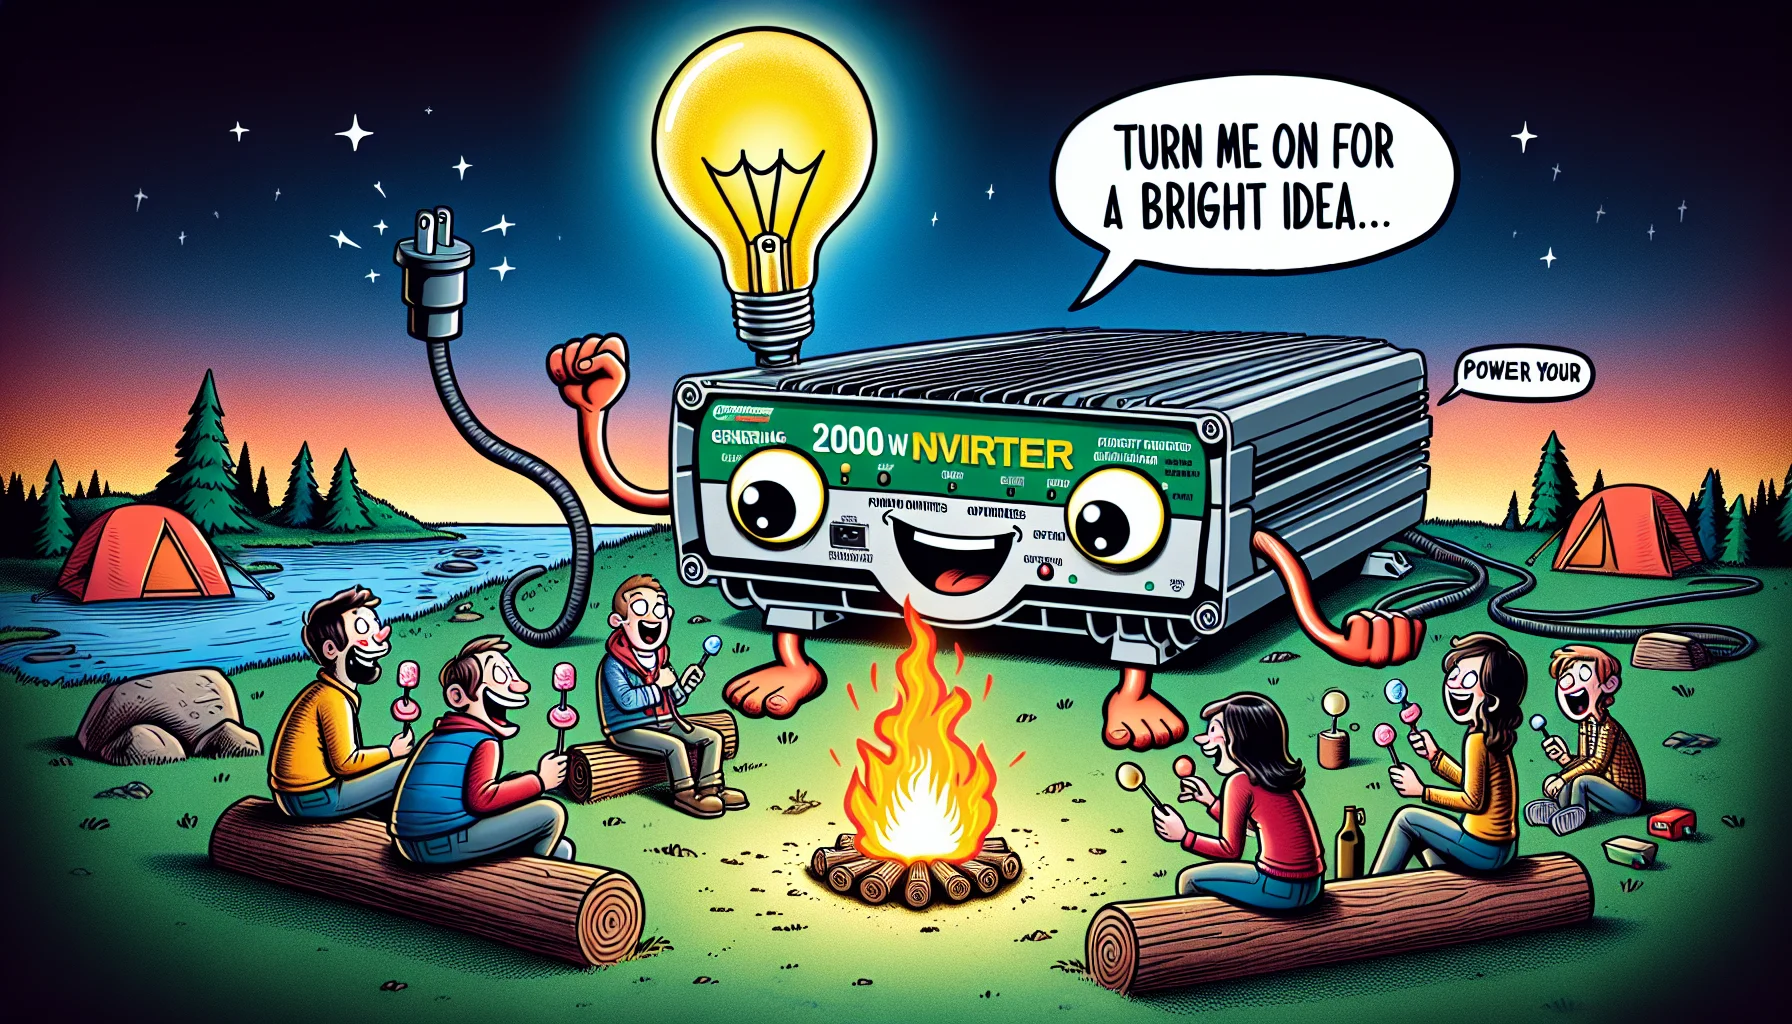 Generate a humorous image consisting of a generic 2000-Watt Inverter that is cheerfully anthropomorphized with cartoon eyes and a wide grin. With its 'arms' that resemble power cables, the inverter is holding up a light bulb that's humorously oversized. The setting is a camping spot during twilight, next to a small water stream, with the inverter generating electricity cheerfully for a group of mixed-gender, multi-racial campers sitting around a roaring campfire, laughing, and toasting marshmallows on sticks. The phrases 'Turn me on for a bright idea', 'Power your adventures' are humorously integrated as comic-style speech bubbles from the inverter.